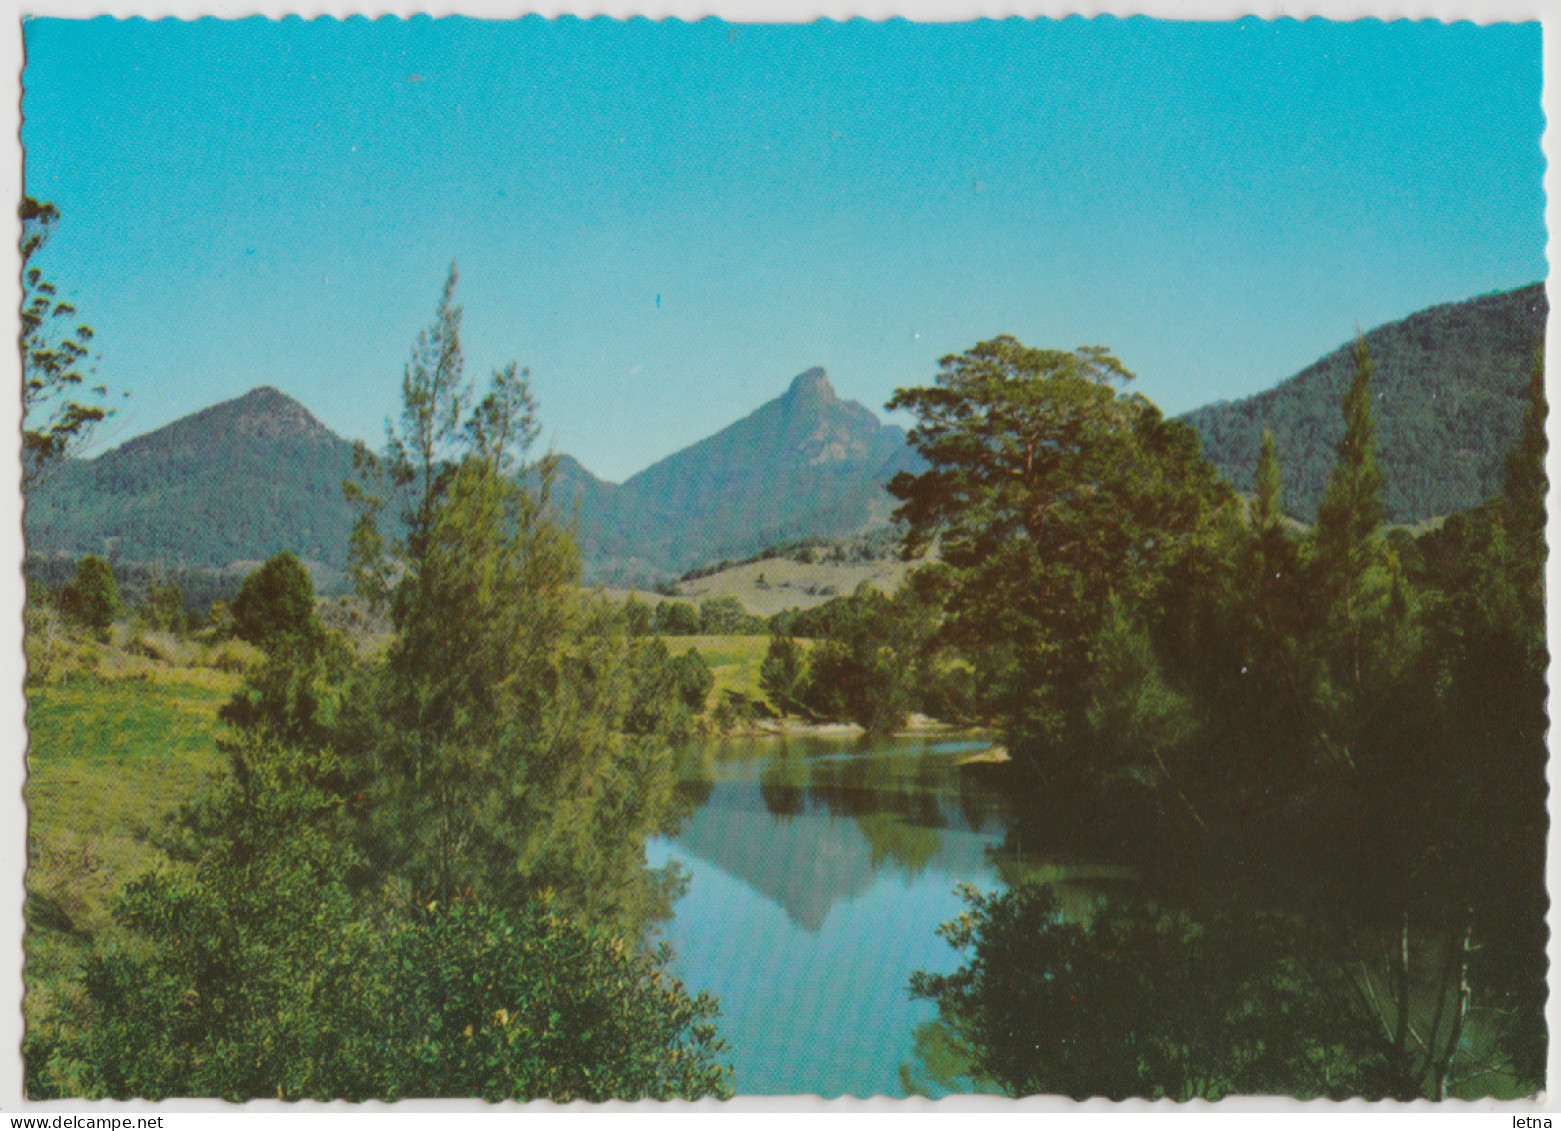 Australia NEW SOUTH WALES NSW Mt Warning From Tweed River MURWILLUMBAH Murray Views W2  Postcard C1970s - Northern Rivers